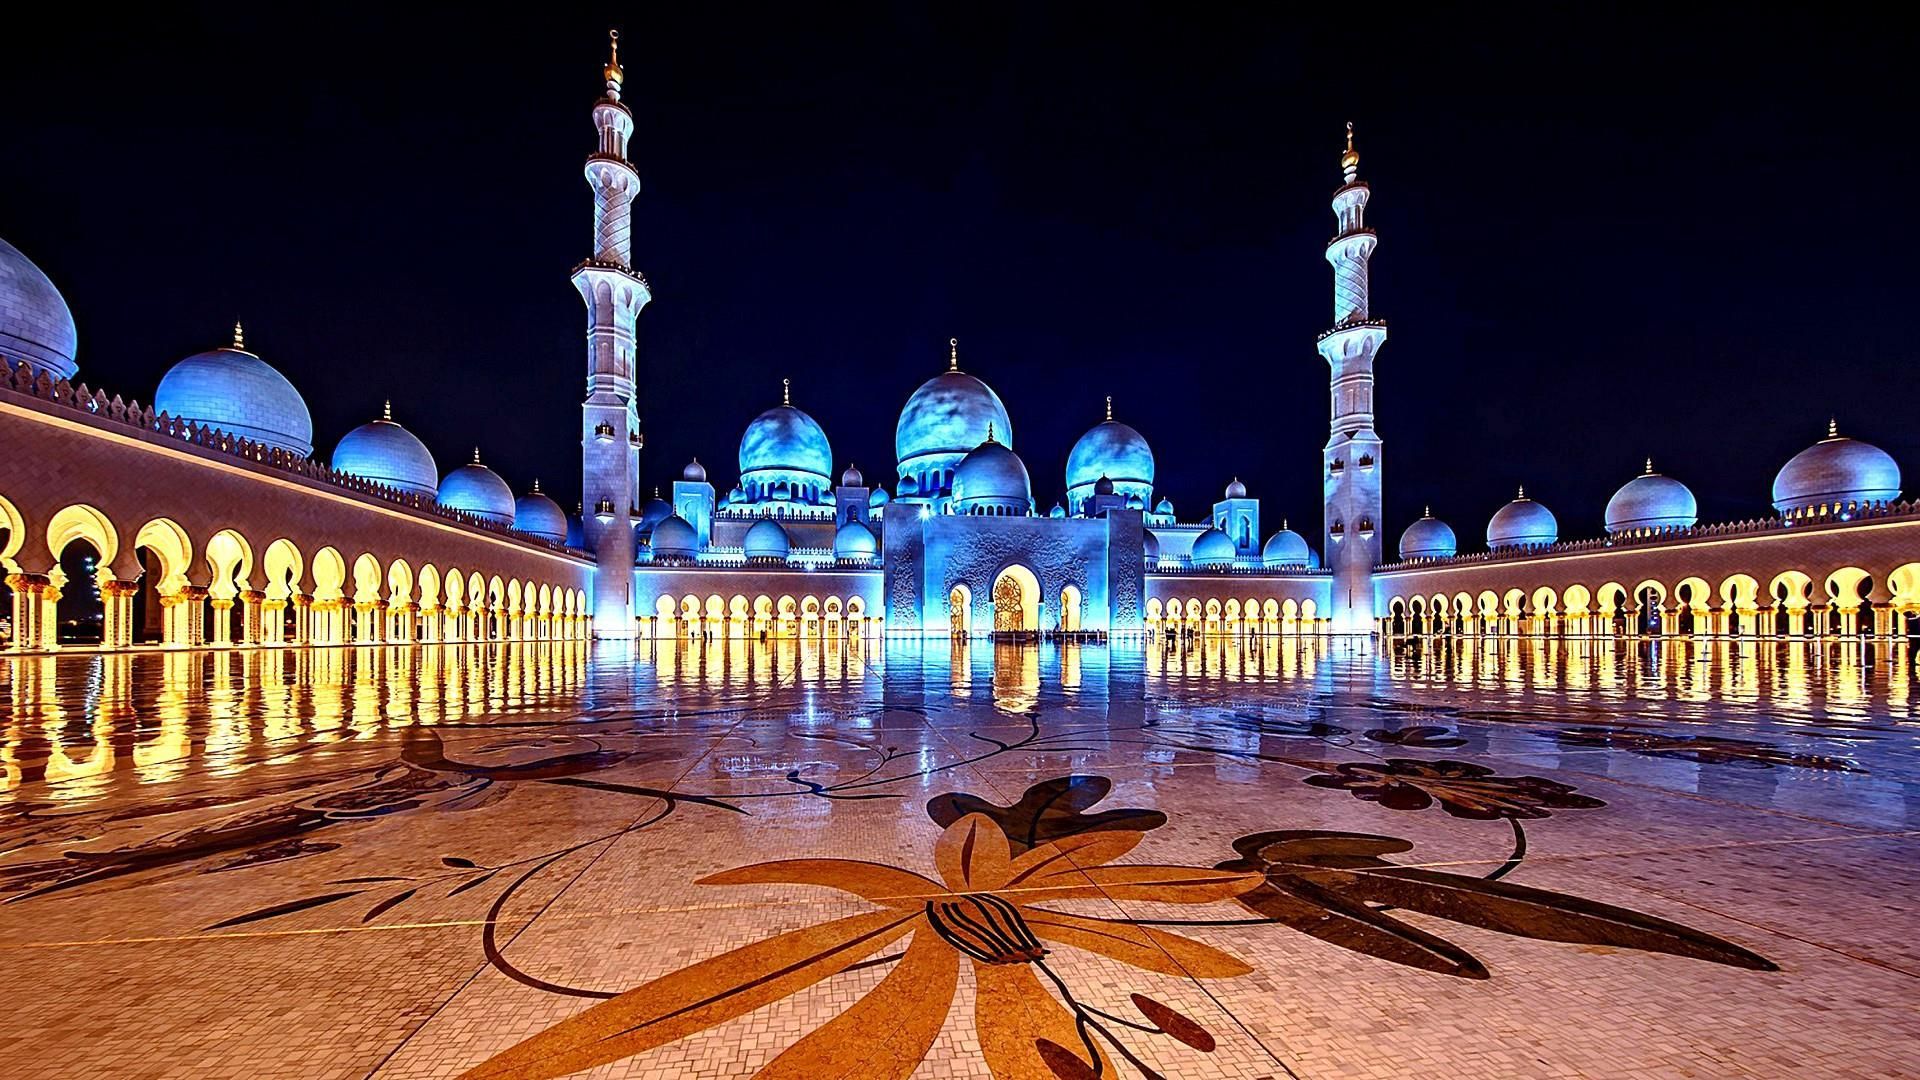 Mosque Photos Download The BEST Free Mosque Stock Photos  HD Images